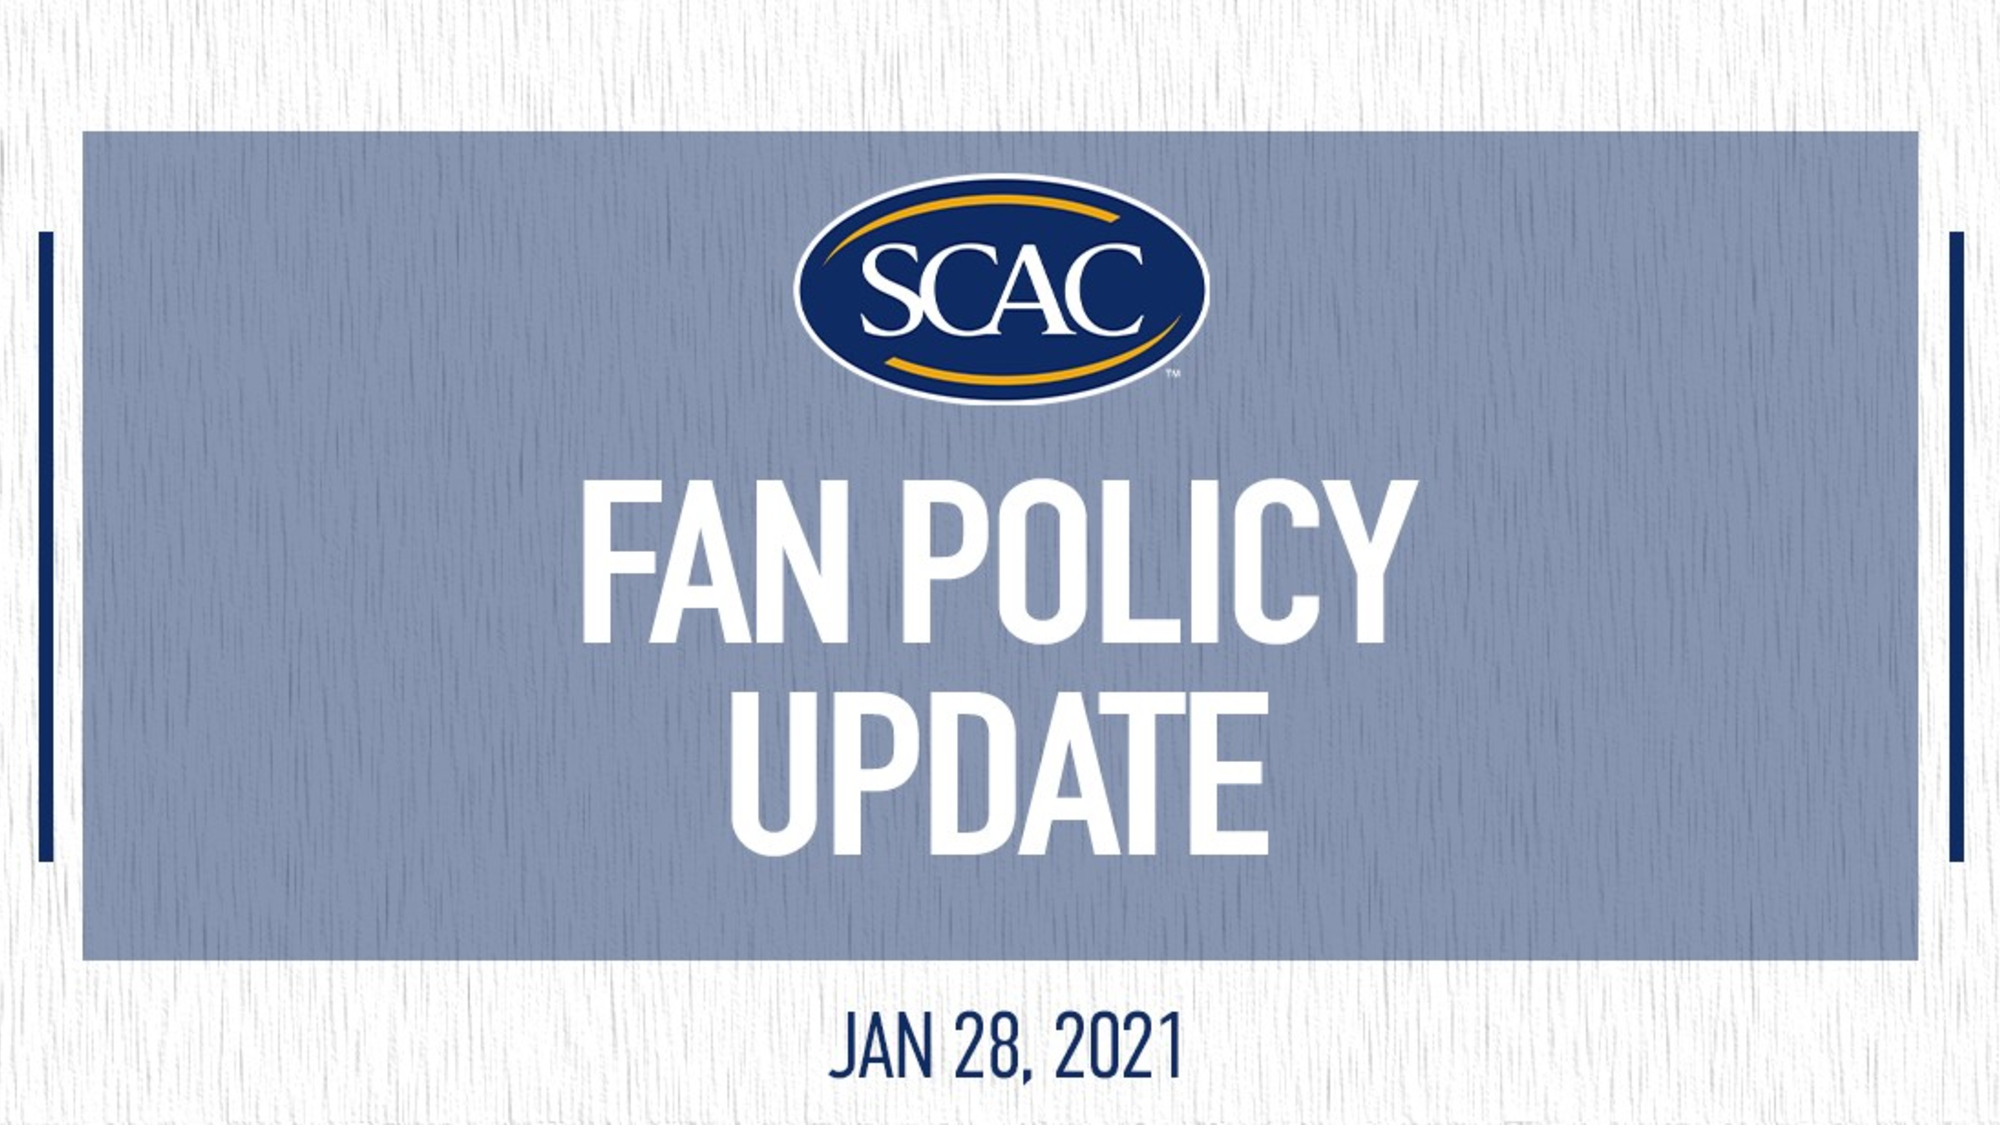 SCAC Announces Fan Policy Update